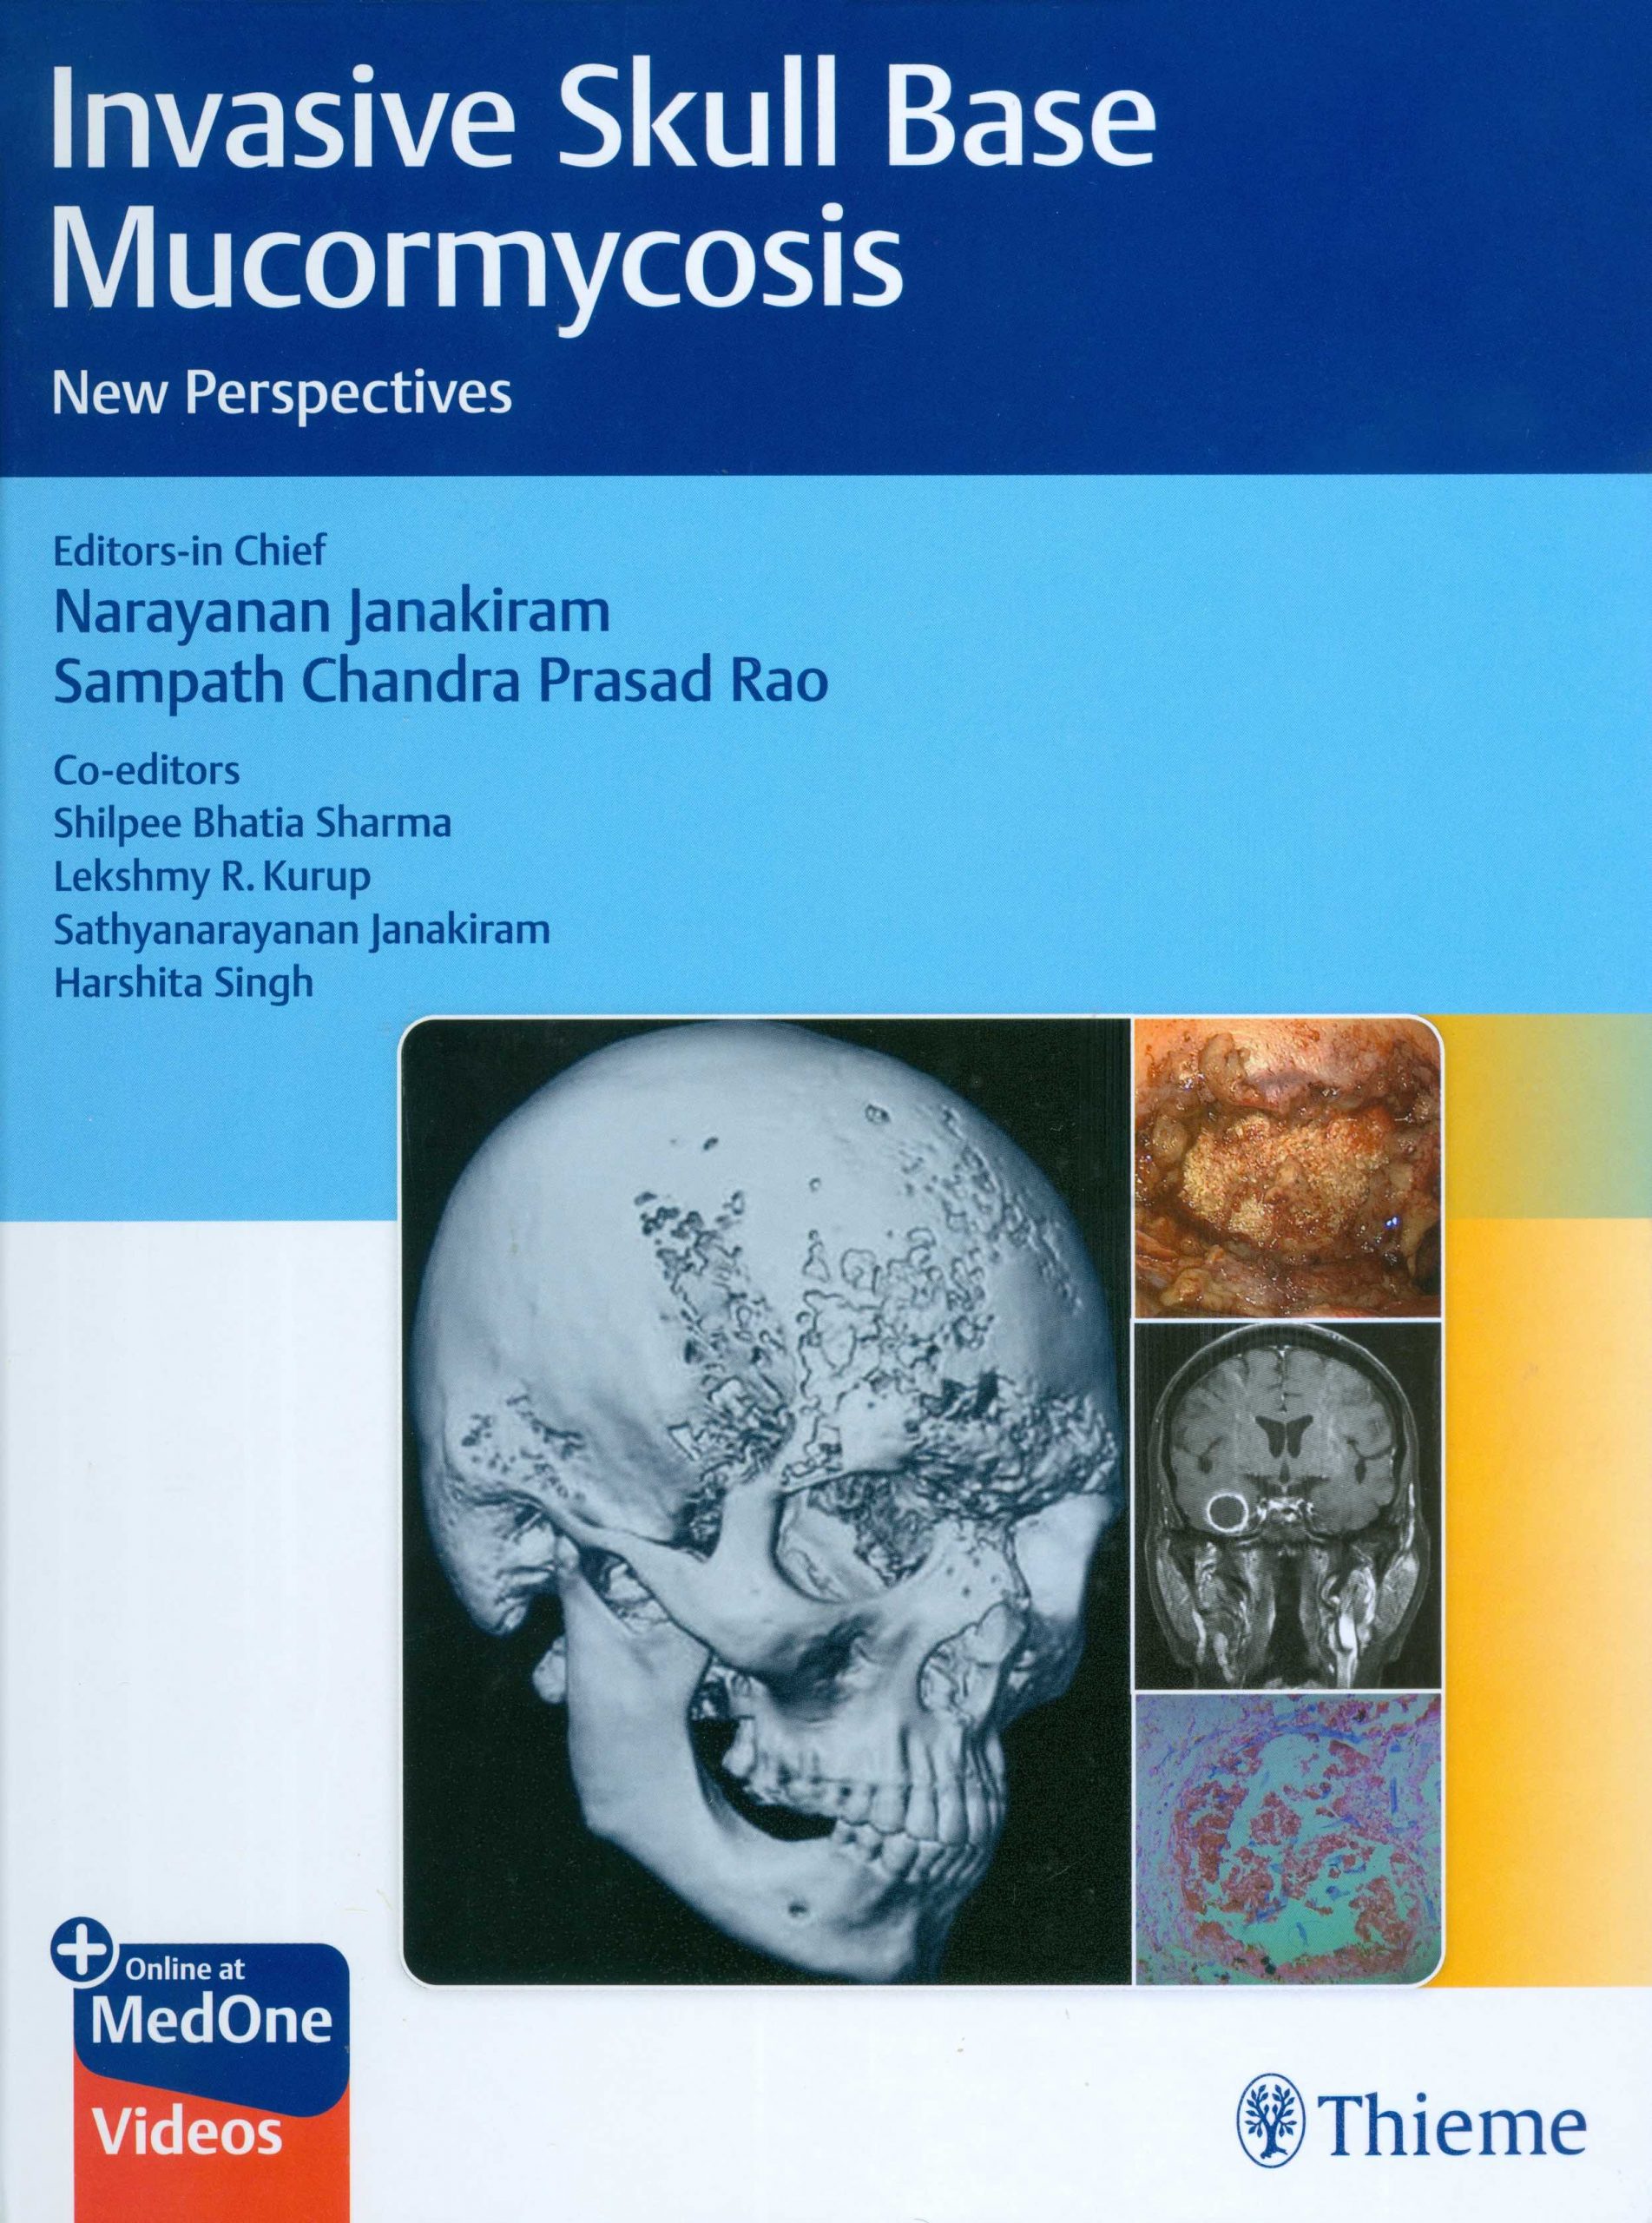 Invasive Skull Base Mucormycosis: New Perspectives